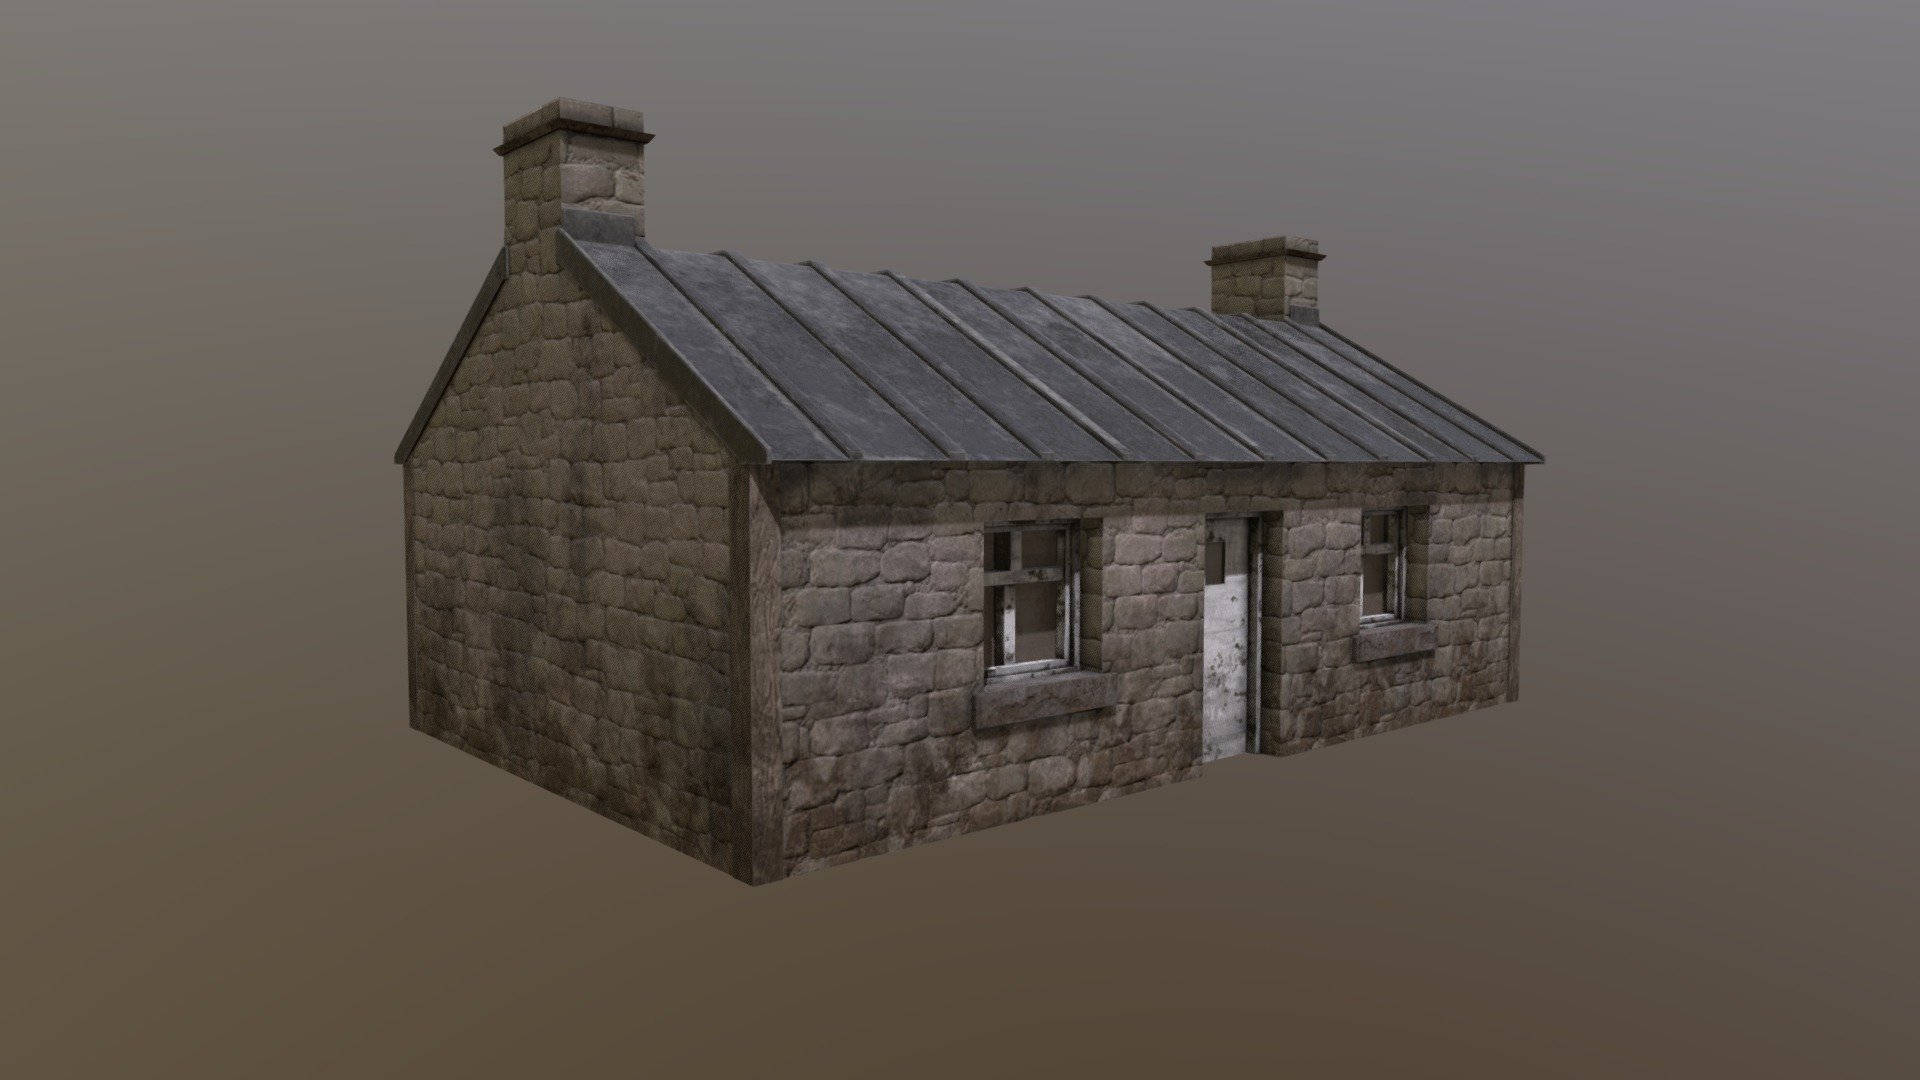 old cottage / both made with Blender and Substance painter. based of buildings found at the st kilda world heritage site in Scotland - Old Cottage / bothy - 3D model by silaspaige1998 3d model